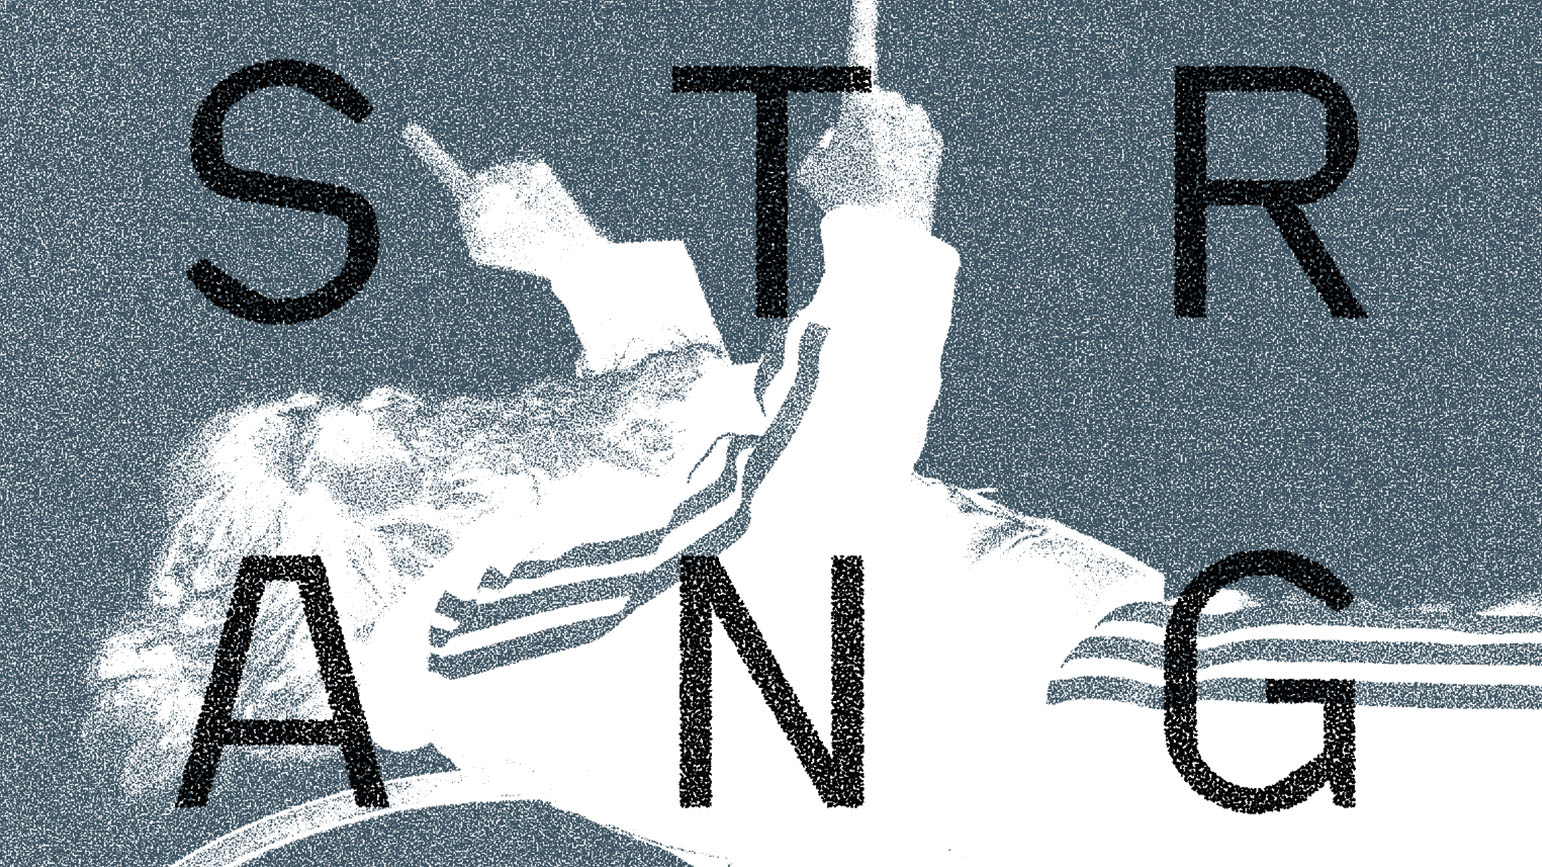 Pixelated high contrast image of a man pointing with both hands and the word "Strange" written in large capital letters